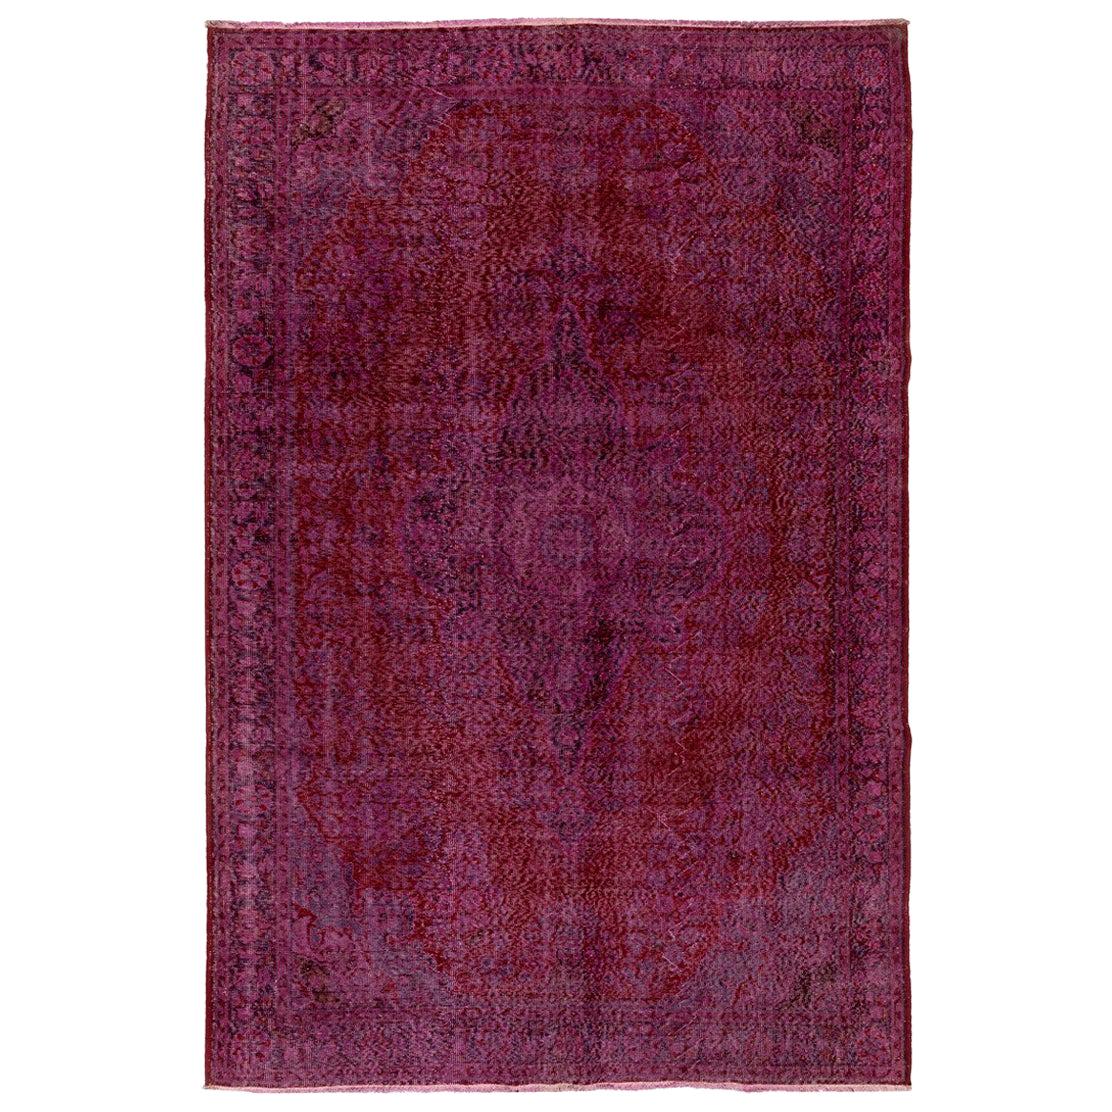 7x10.2 Ft Vintage Hand-knotted Over-dyed Turkish Wool Rug in Burgundy